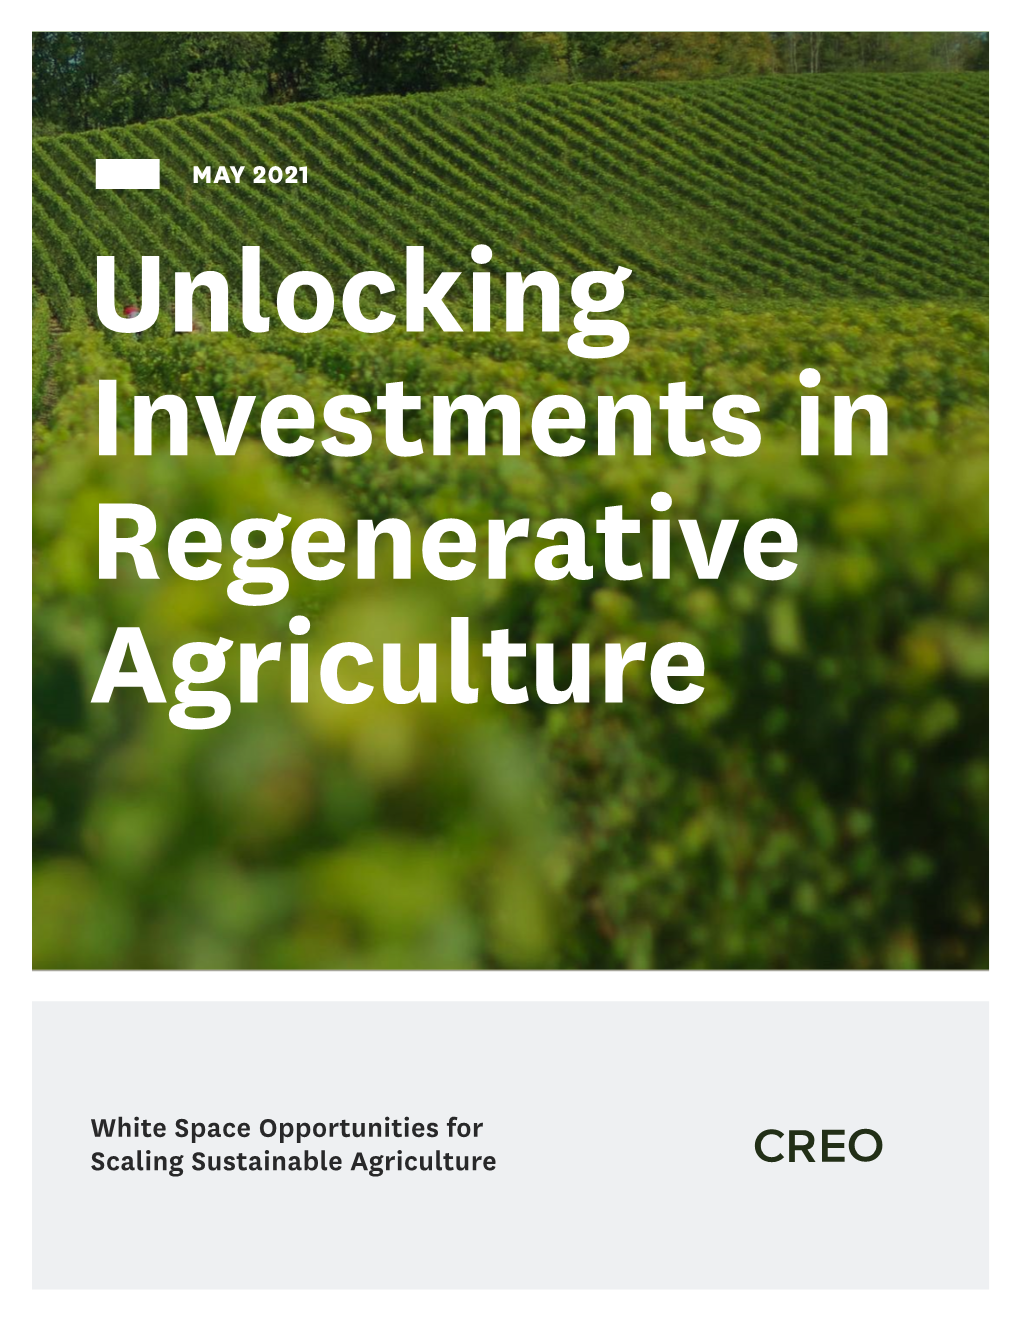 White Space Opportunities for Scaling Sustainable Agriculture About CREO